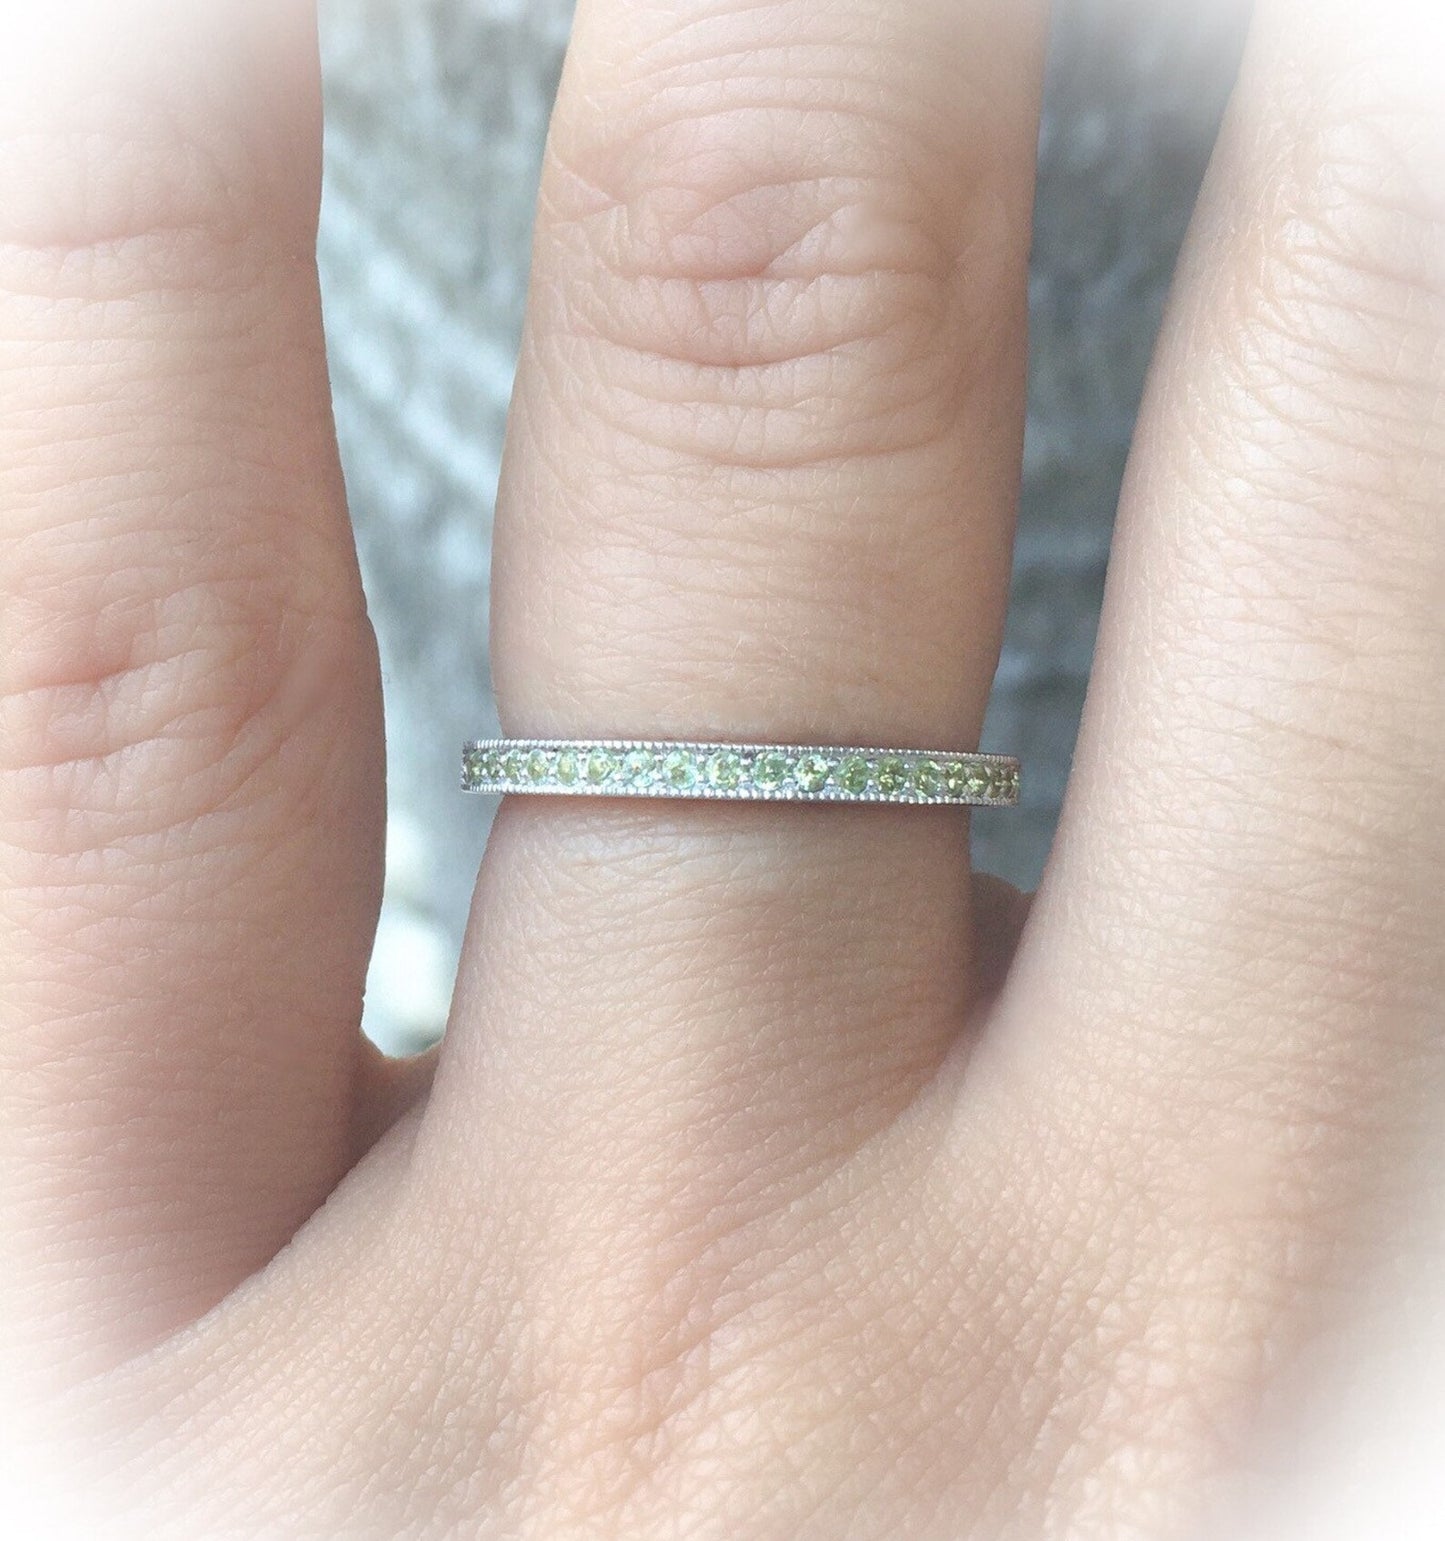 Reserved Listing for Platinum Full Eternity Peridot Band/ Channel Pave, 2mm, Milgrain